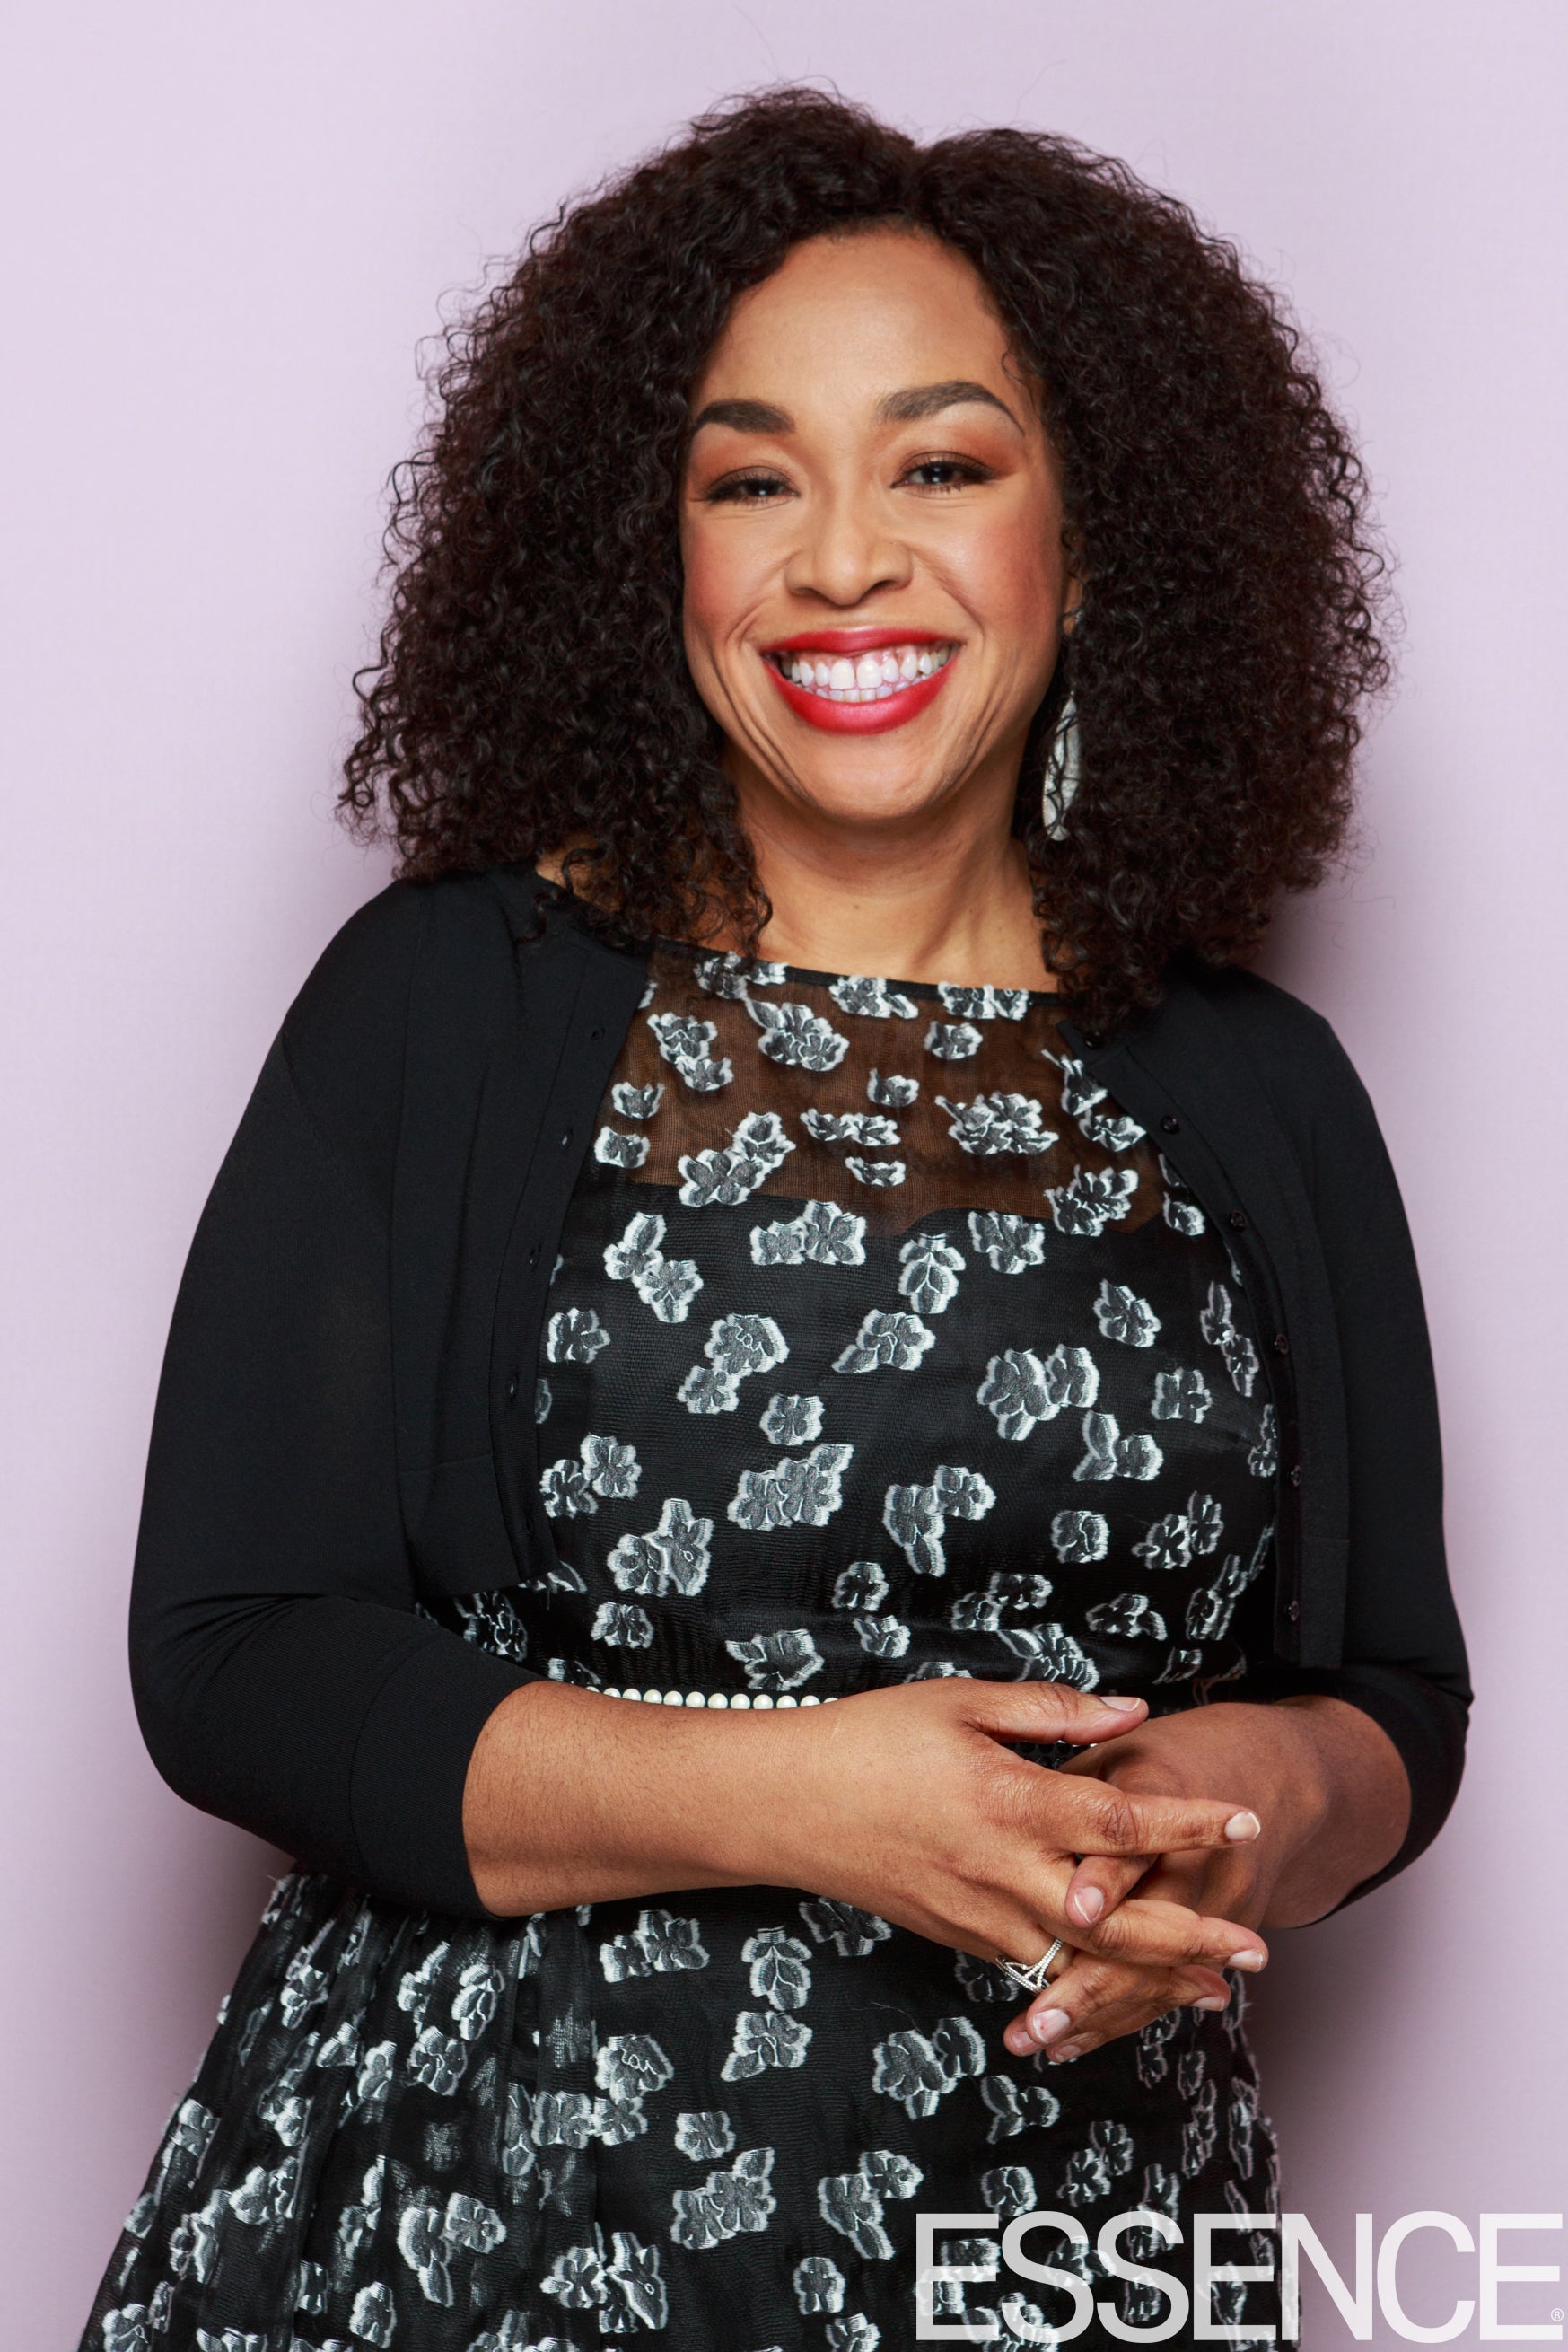  Shonda Rhimes' Success By The Numbers
